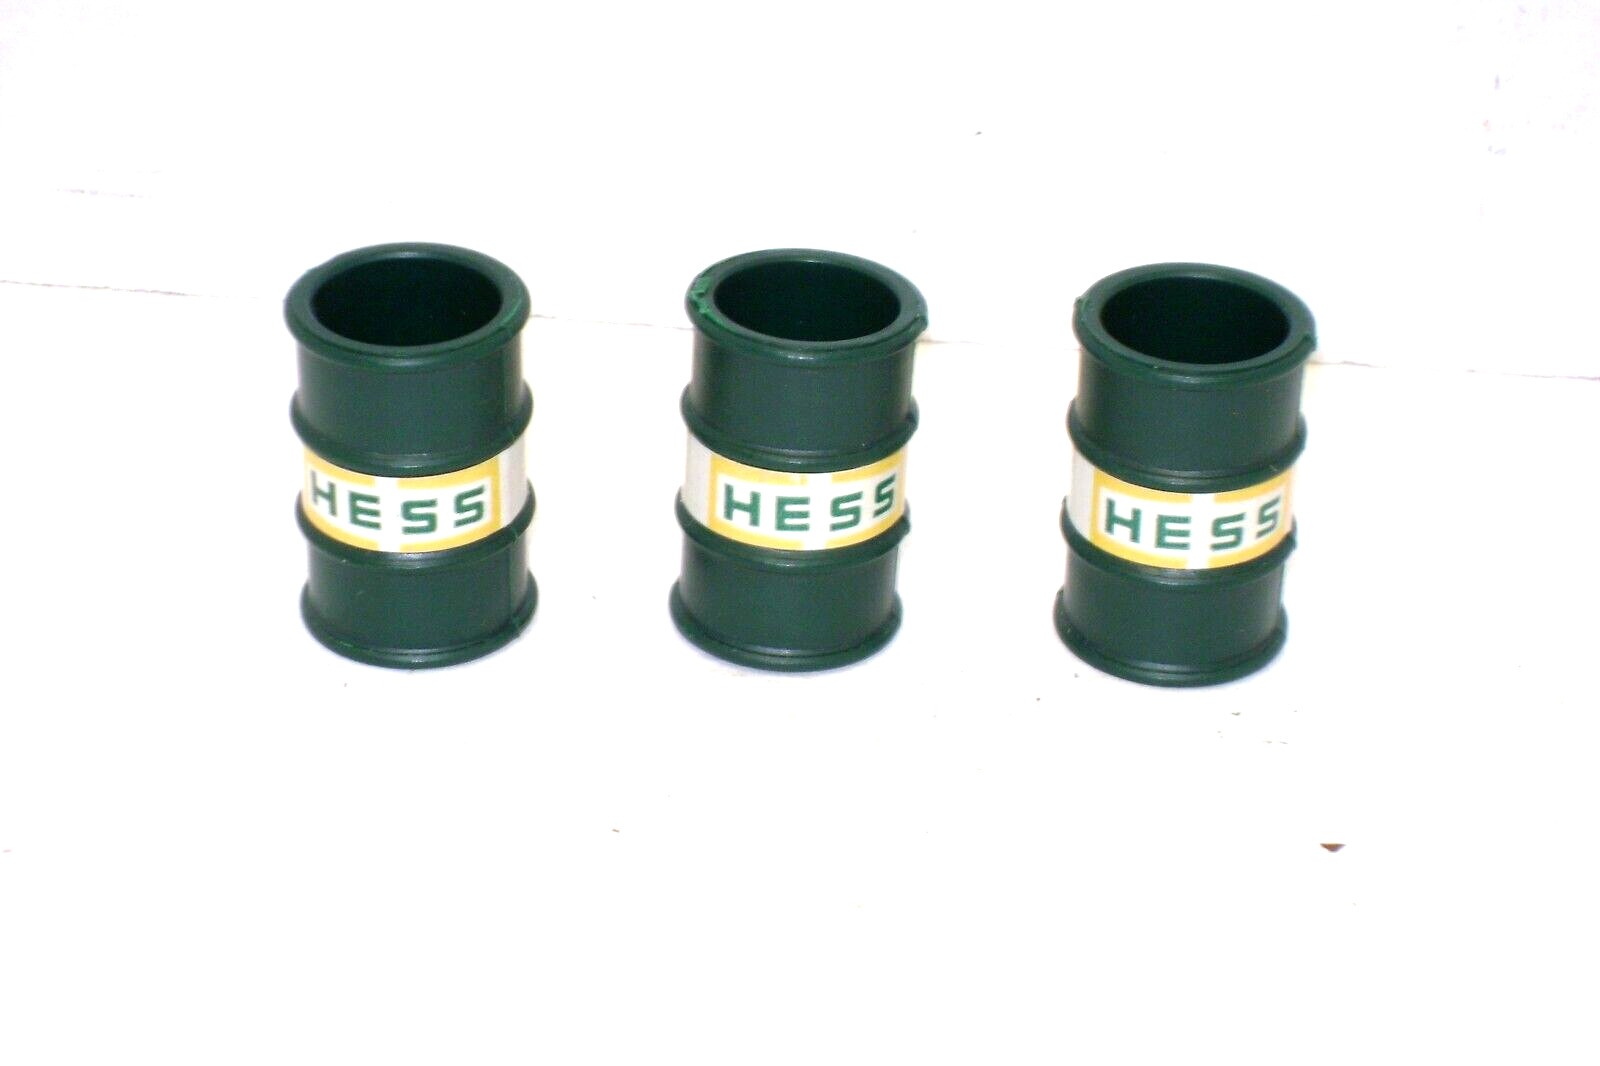 Vintage Original Hess Oil Barrels from the 70\'s-Exc Condition